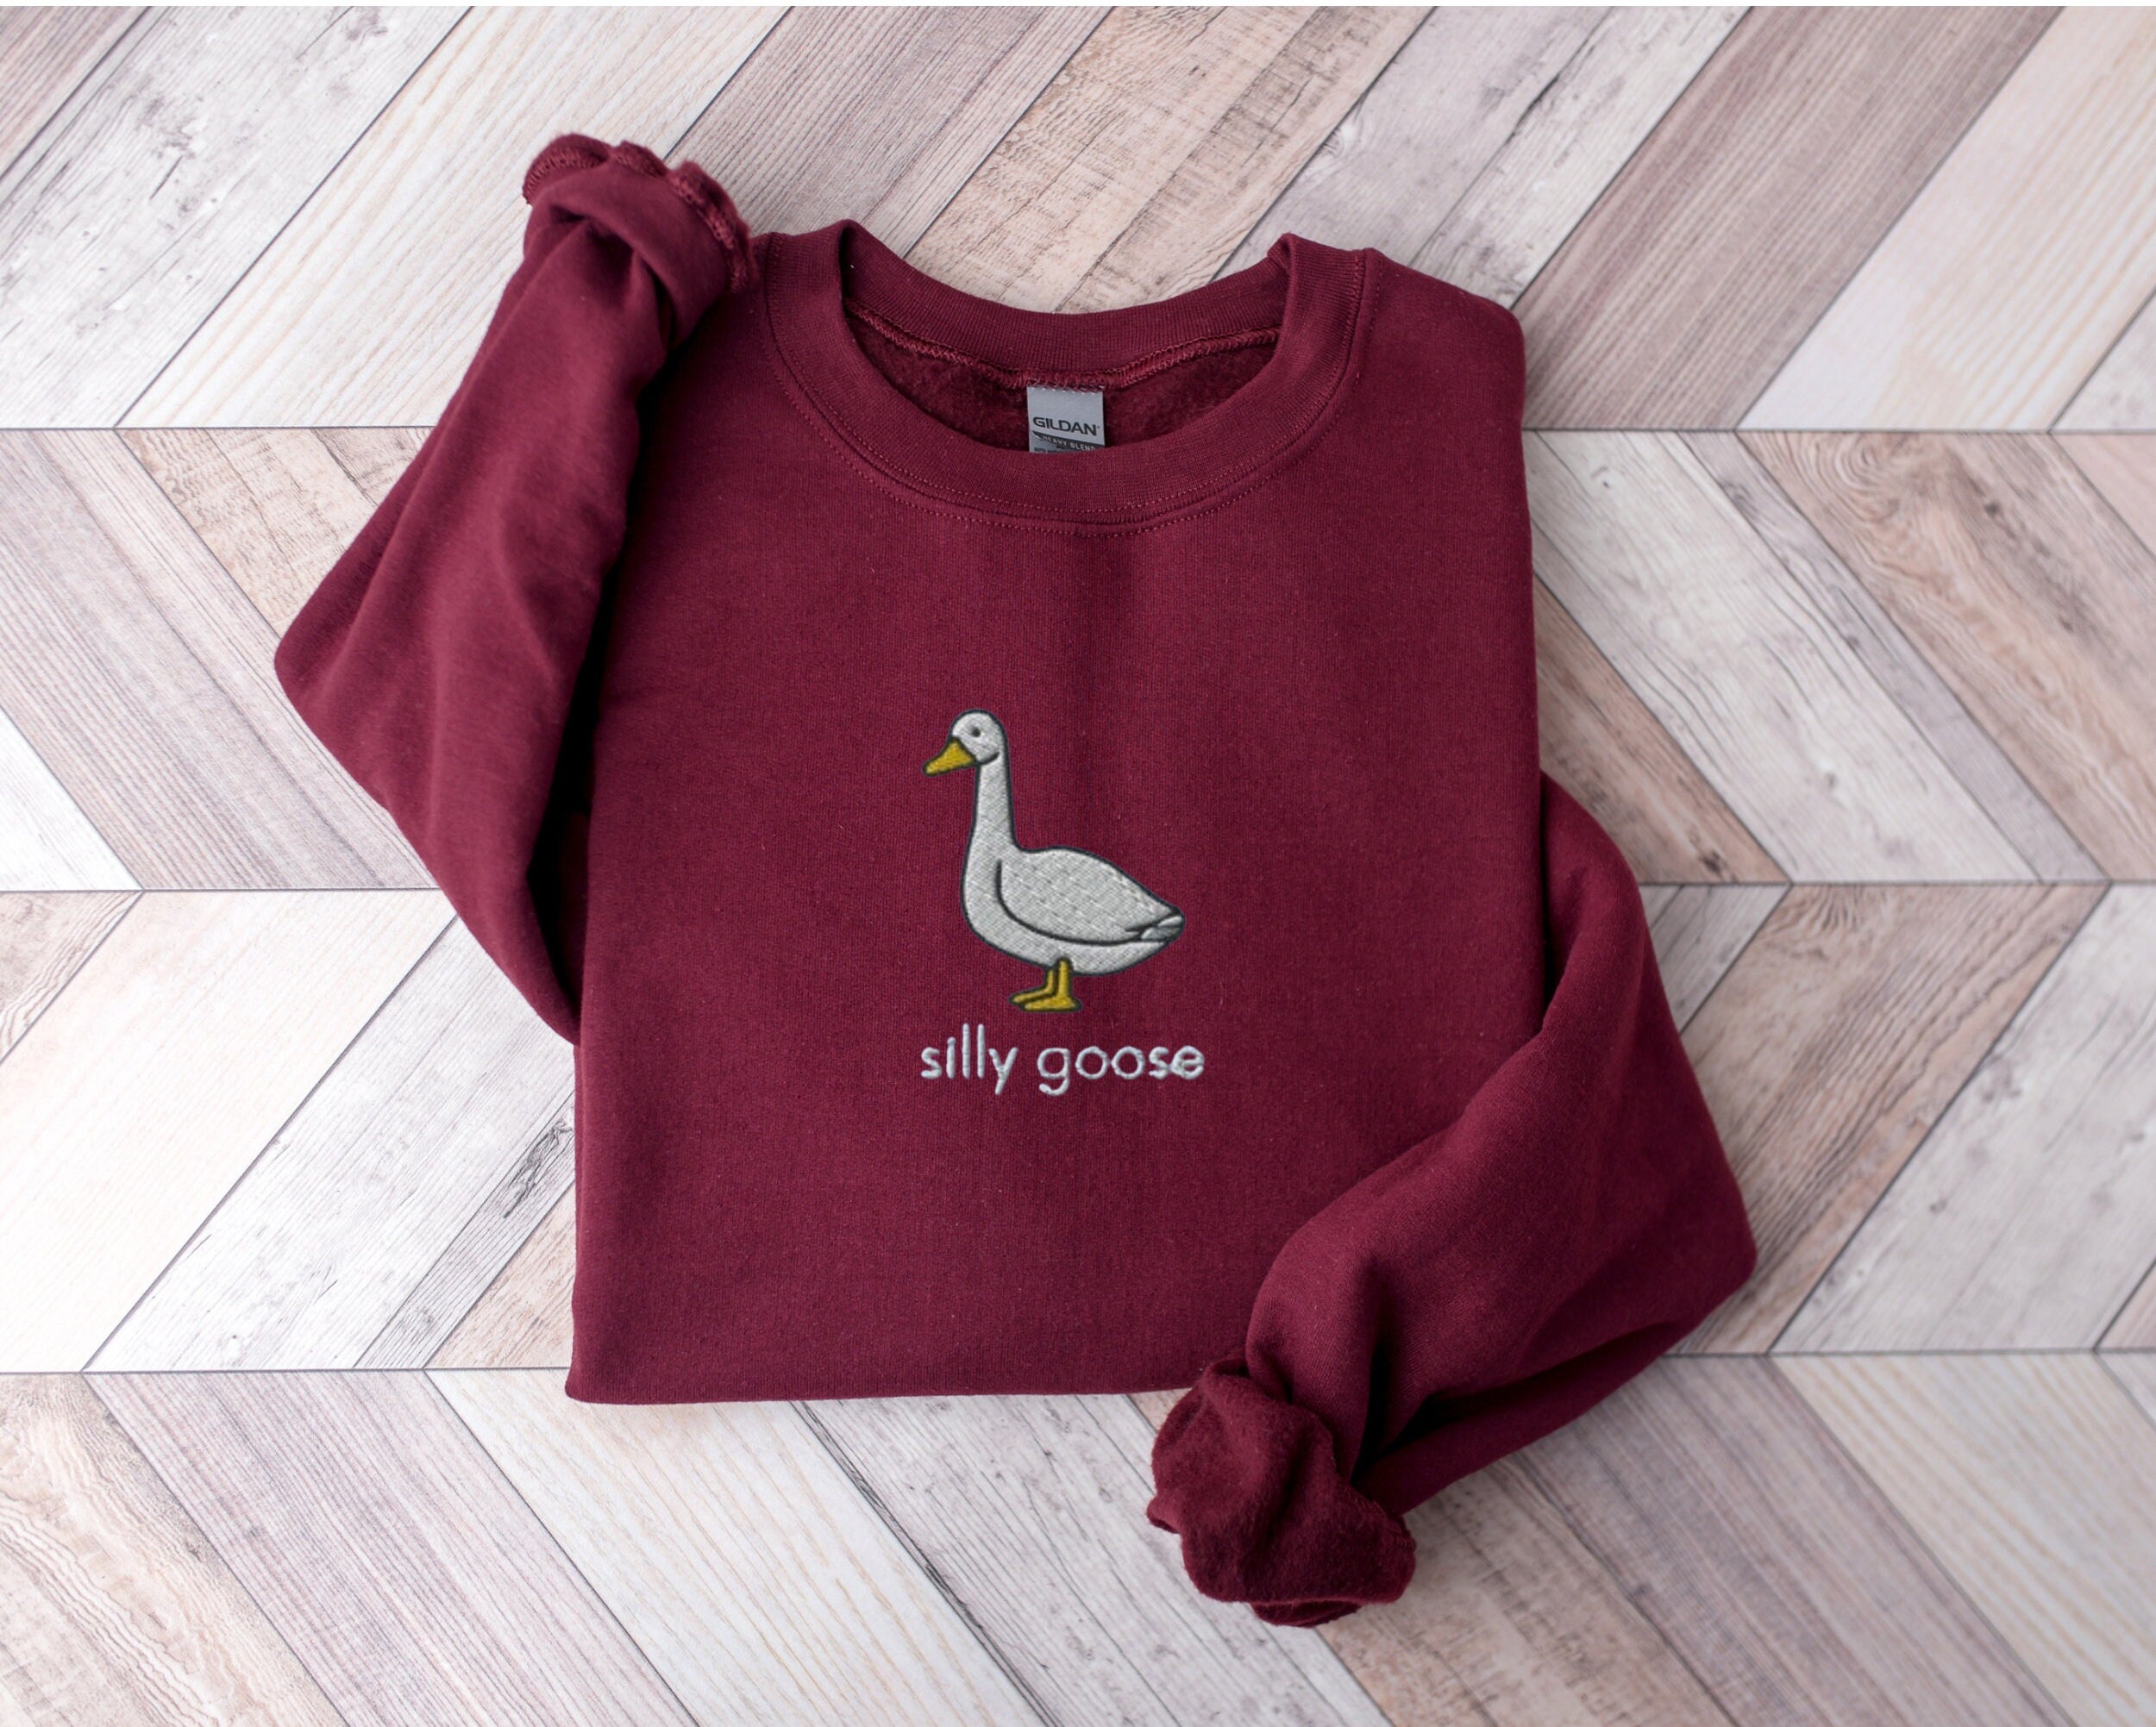 Discover Embroidered Silly Goose Sweatshirt, Silly Goose Sweatshirt, Silly Goose Embroidered Sweatshirt